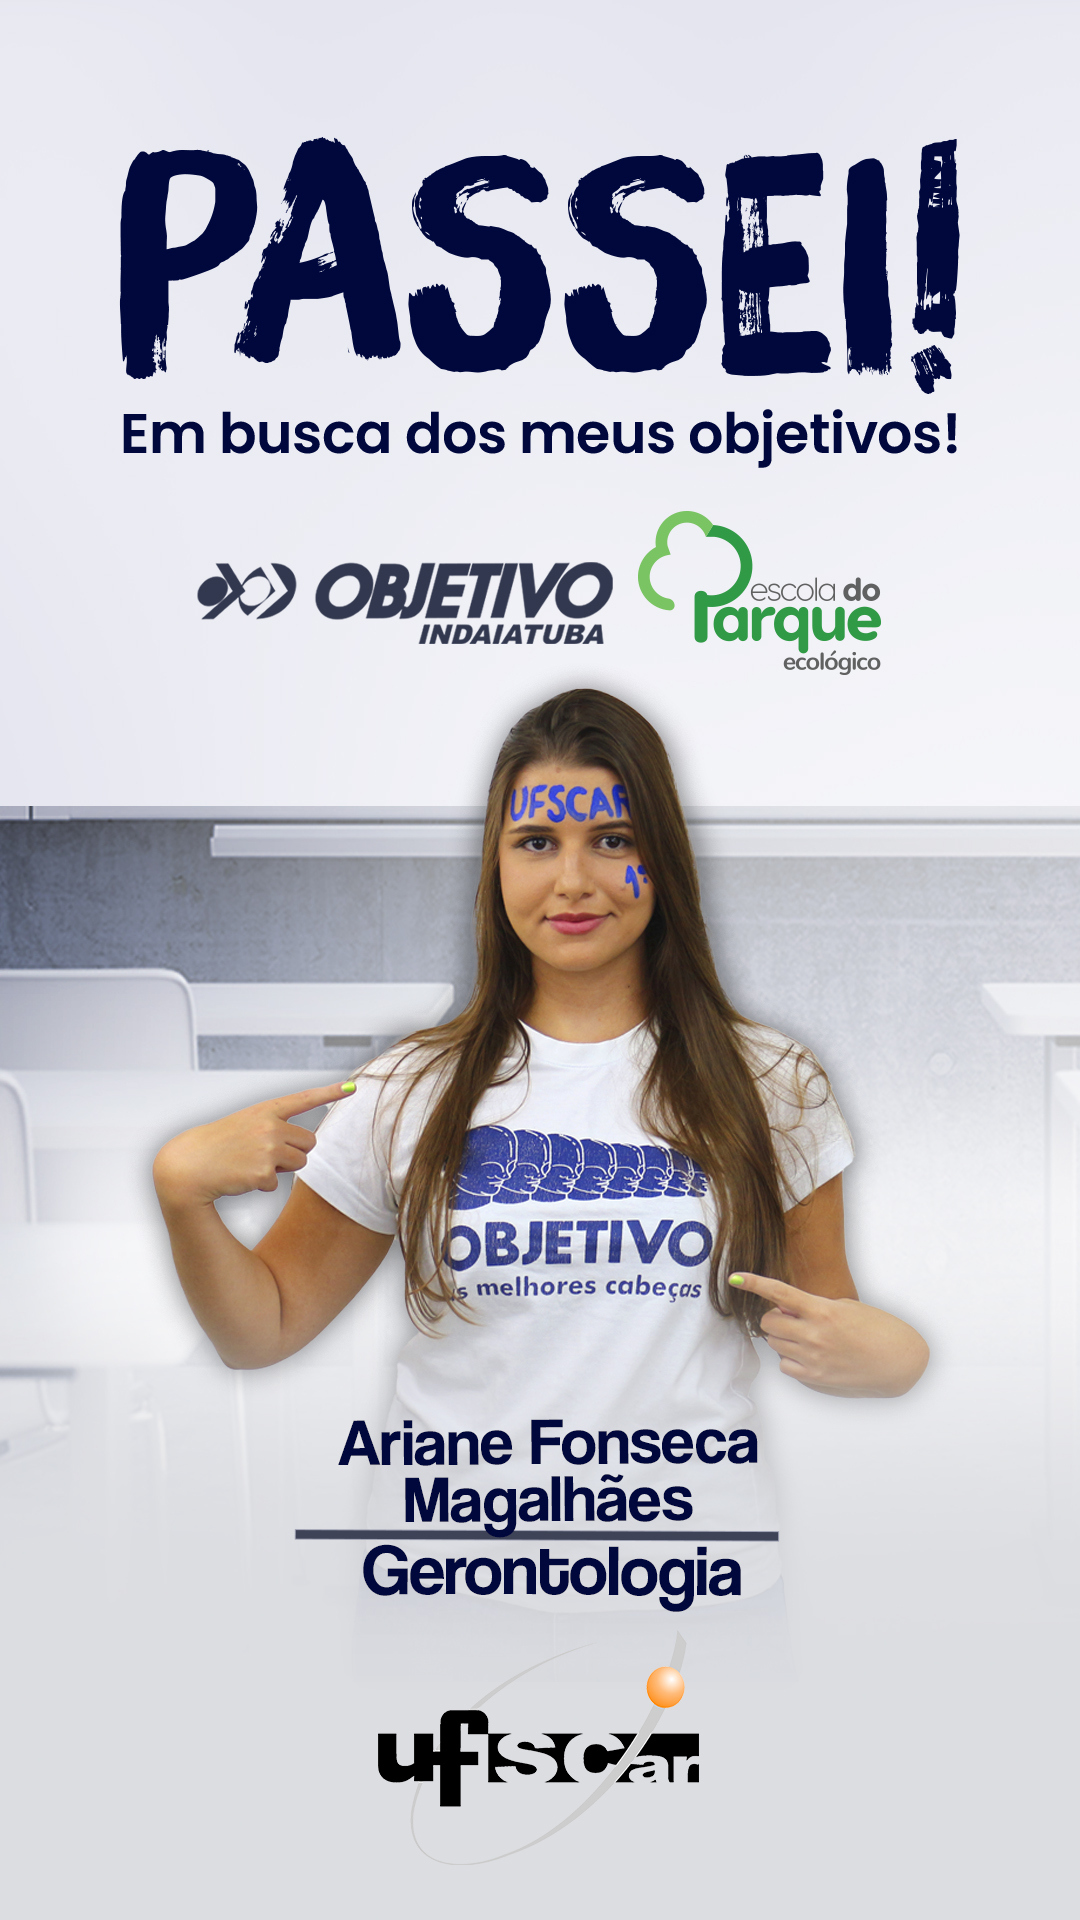 Ariane Fonseca Magalhães